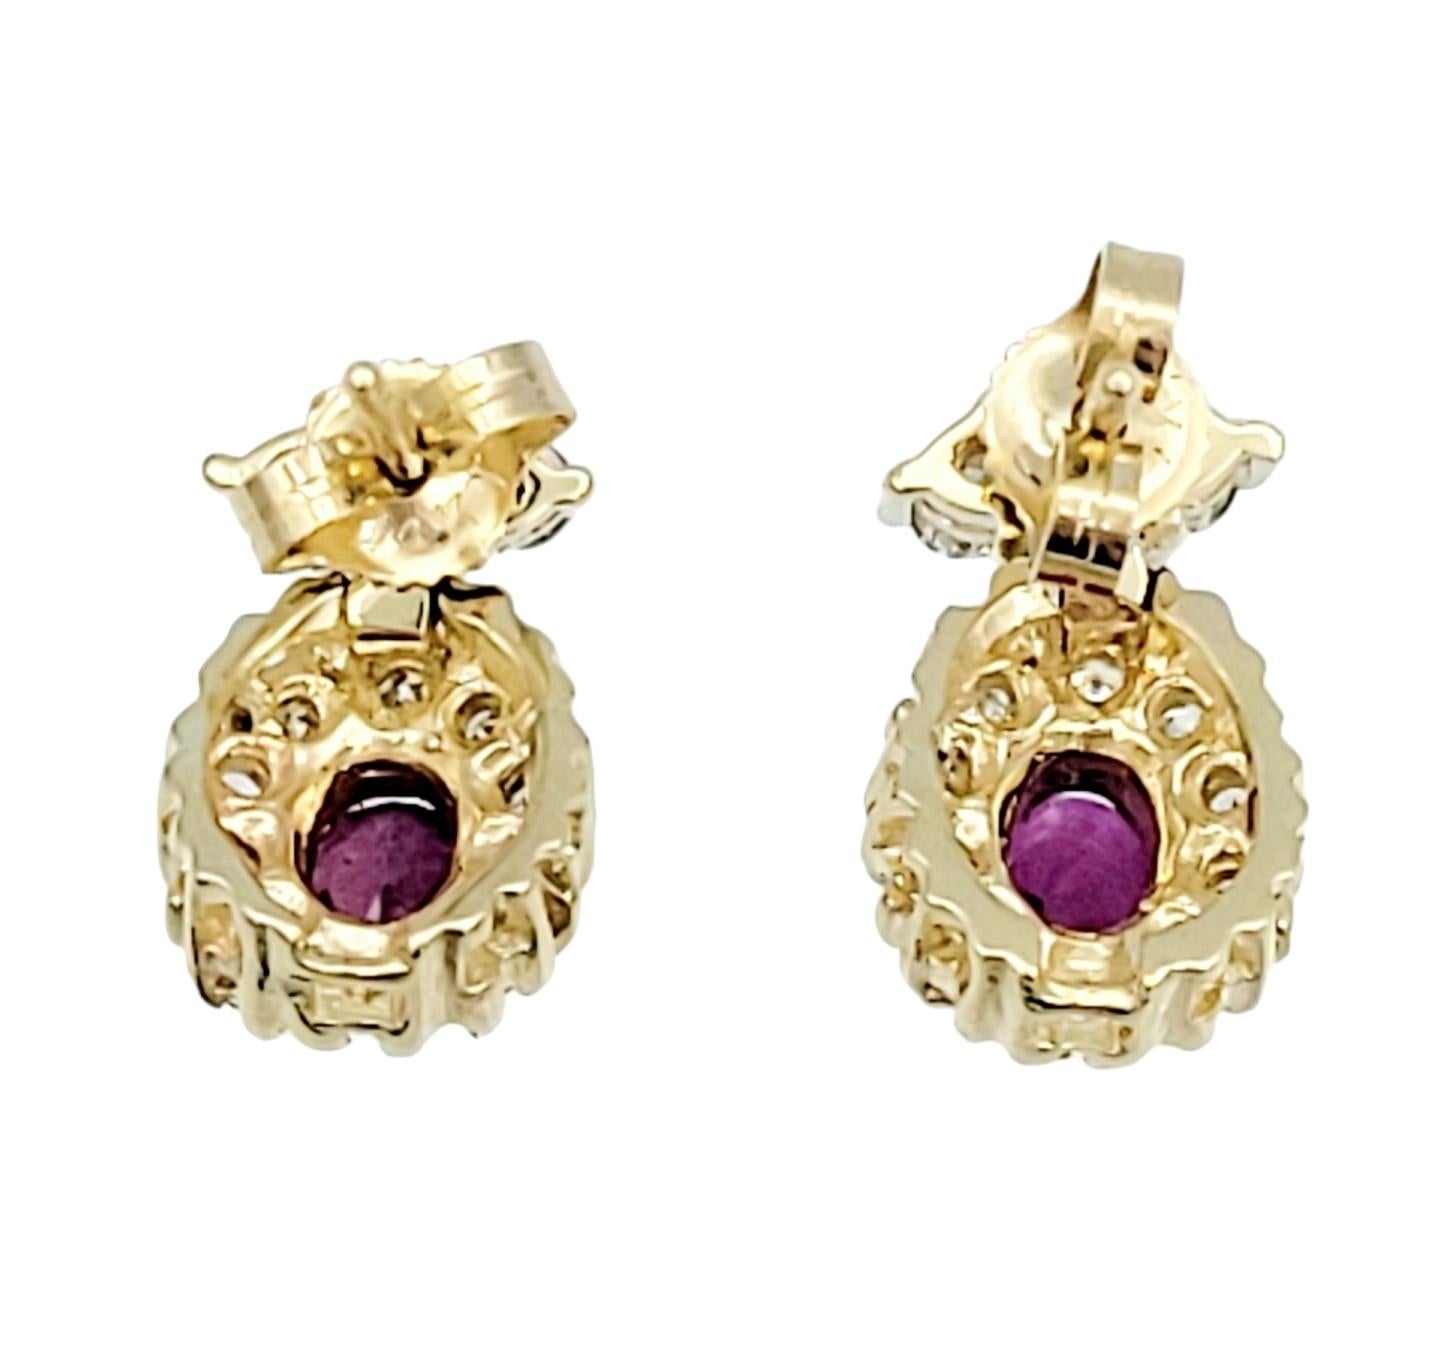 Oval Cut Ruby Earrings with Round Diamond Halos Set in 14 Karat Yellow Gold In Good Condition For Sale In Scottsdale, AZ